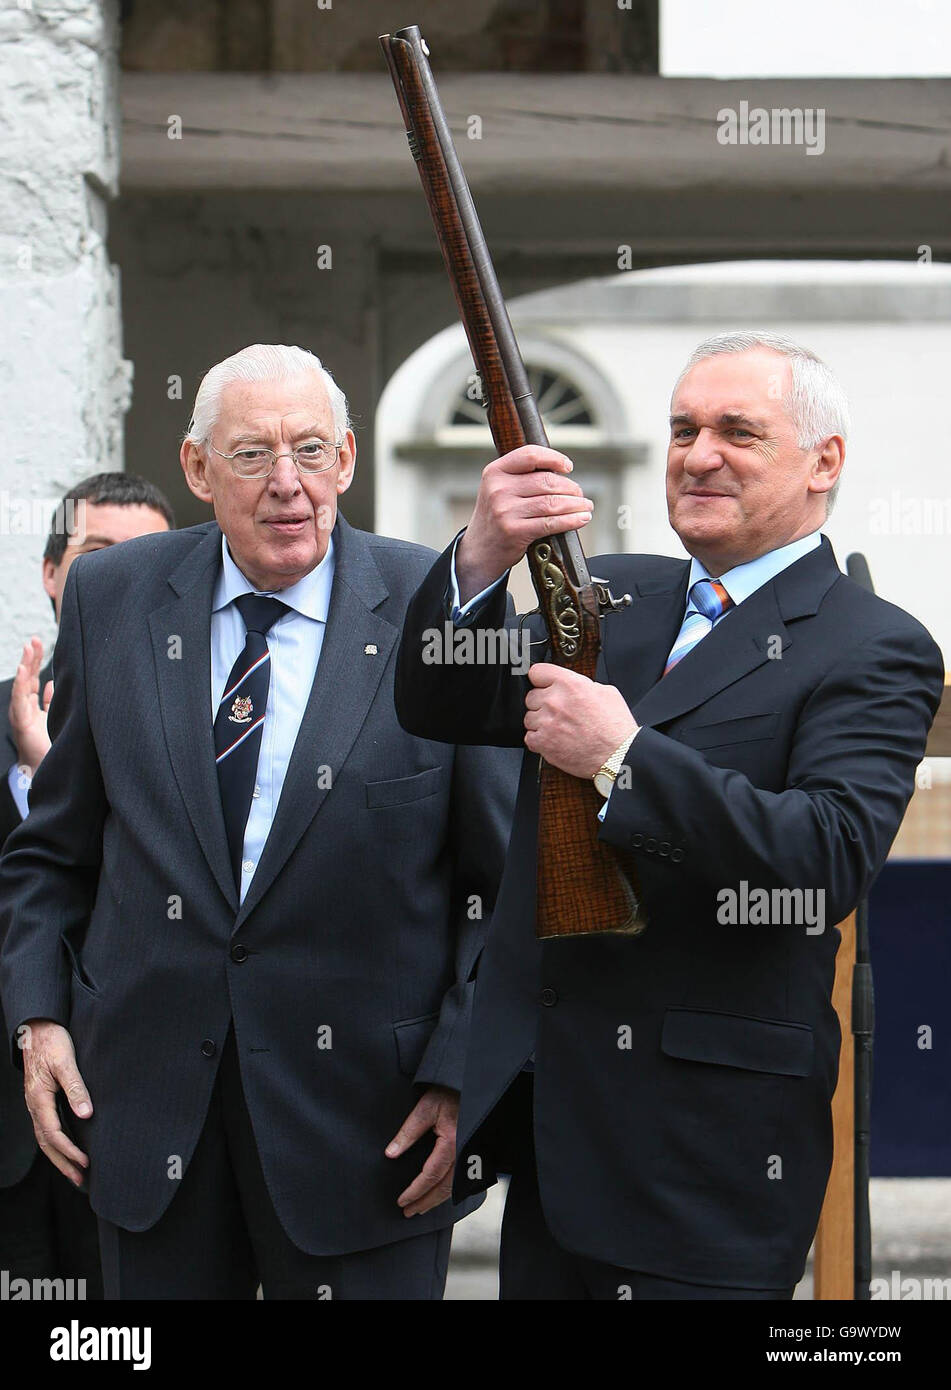 Northern Irelands First Minister Ian Paisley and Taoiseach Bertie Ahern; Ahern holds a three hundred year old musket during their visit to the historic Battle of the Boyne site in Co Meath. Stock Photo